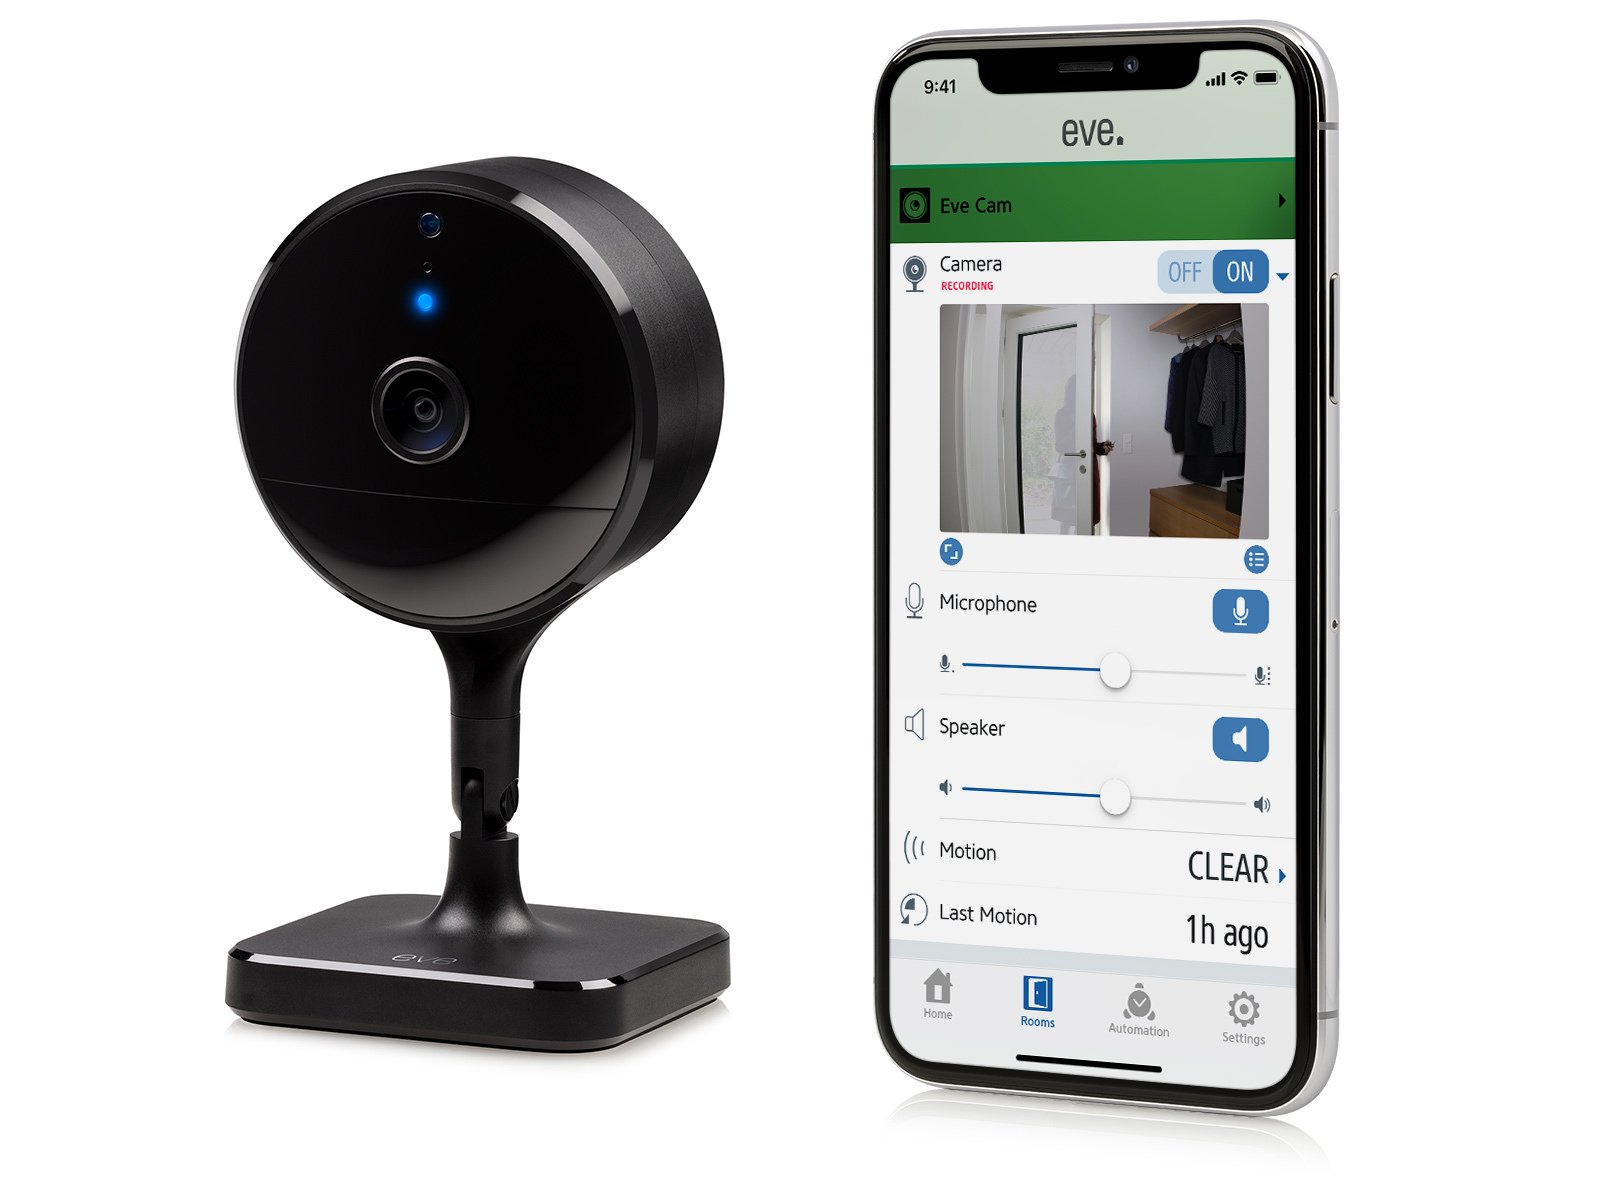 1594740679 353 Each security camera with HomeKit Secure video support